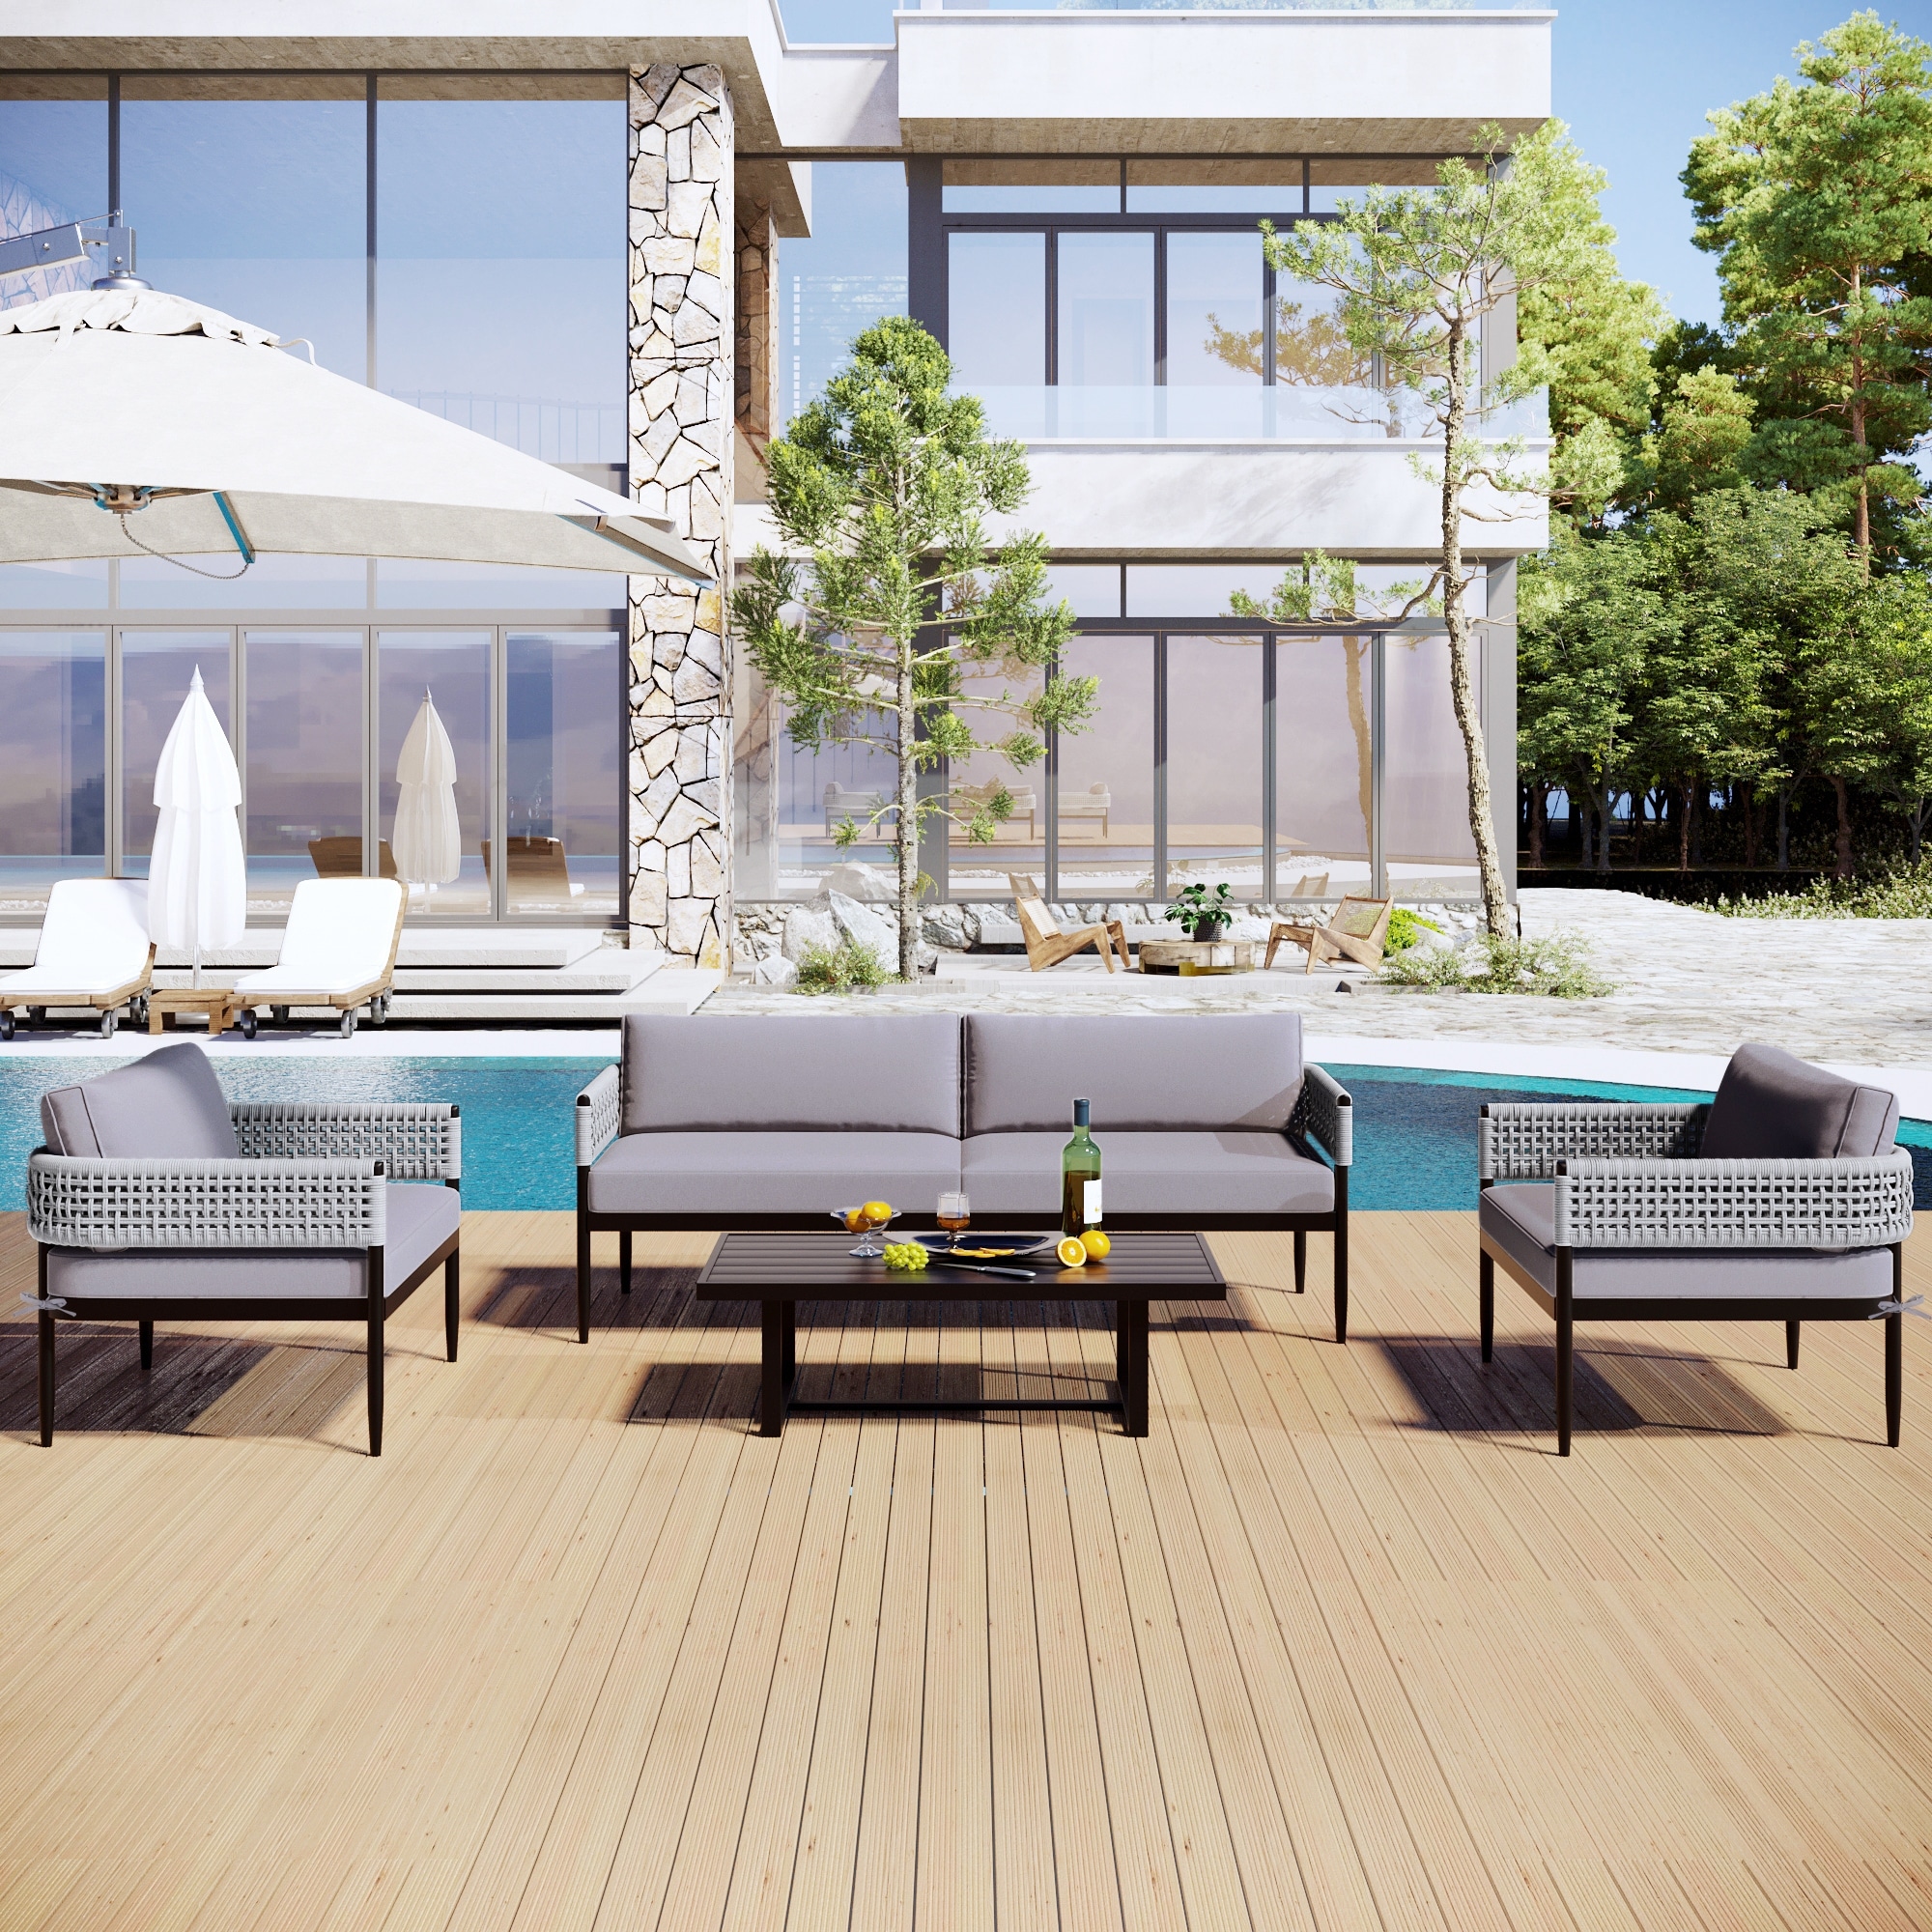 4 Piece Outdoor Suit Combination With 1 Love Sofa 2 Single Sofa And 1 Coffee Table For Swimming Pool Patio